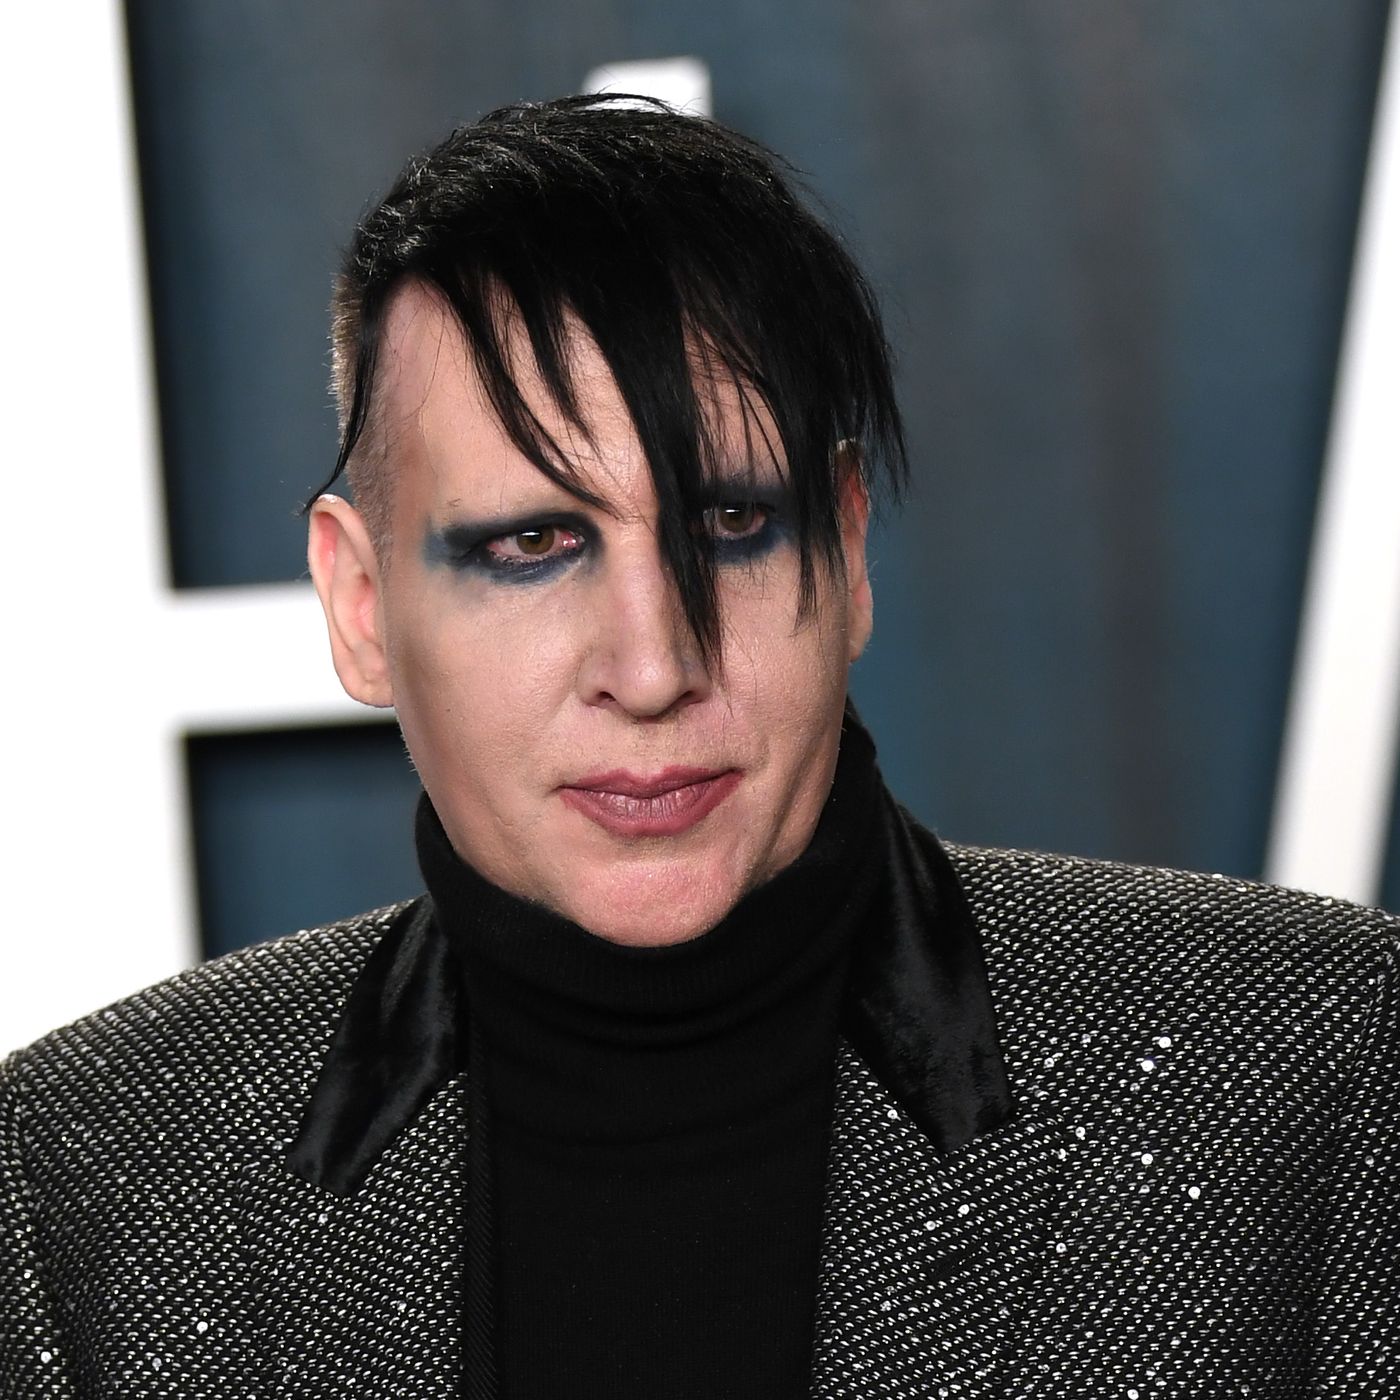 What Did Marilyn Manson Do? Brian Warners Abuse Allegations pic